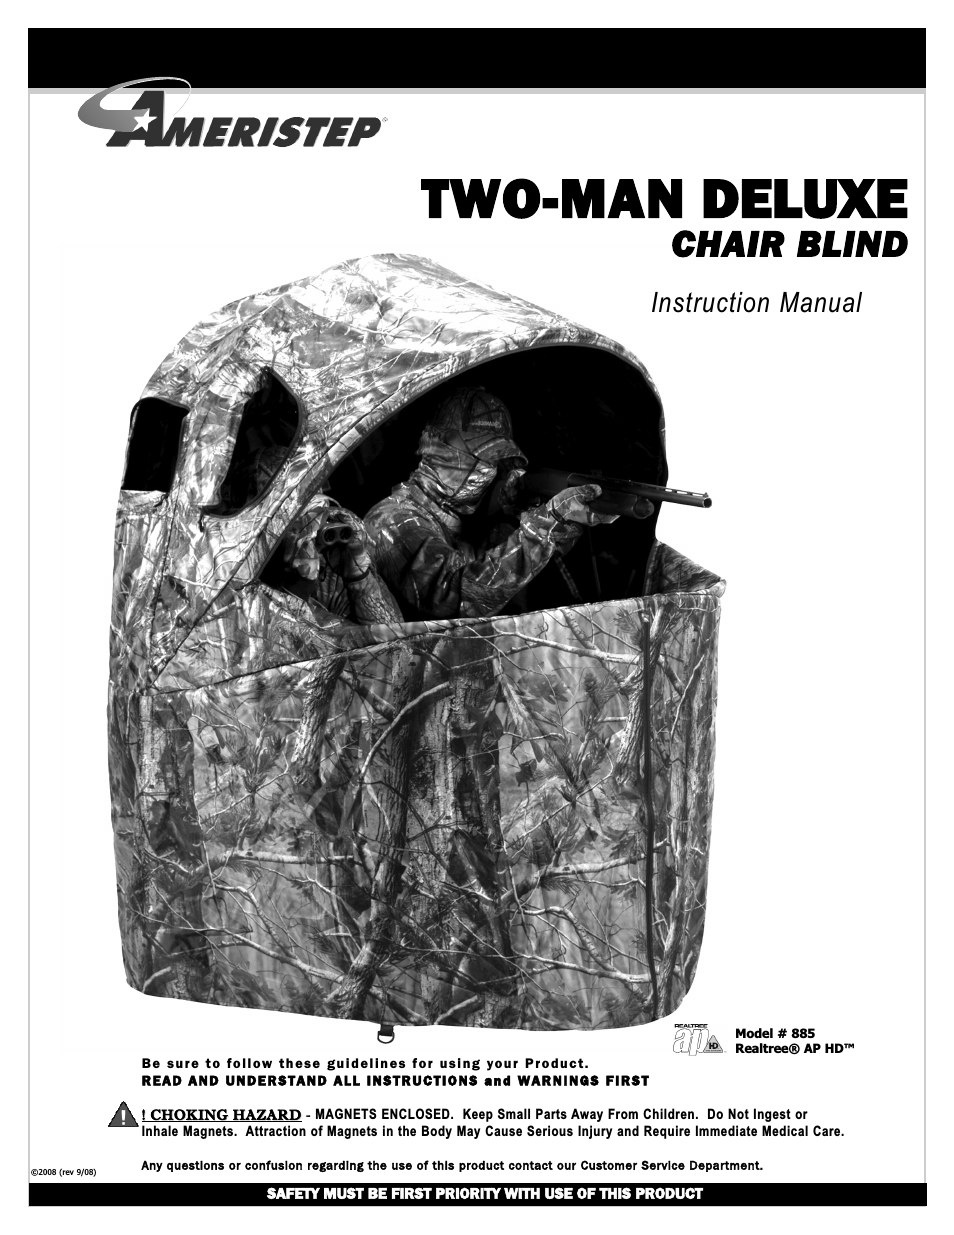 TWO-MAN DELUXE CHAIR BLIND 885